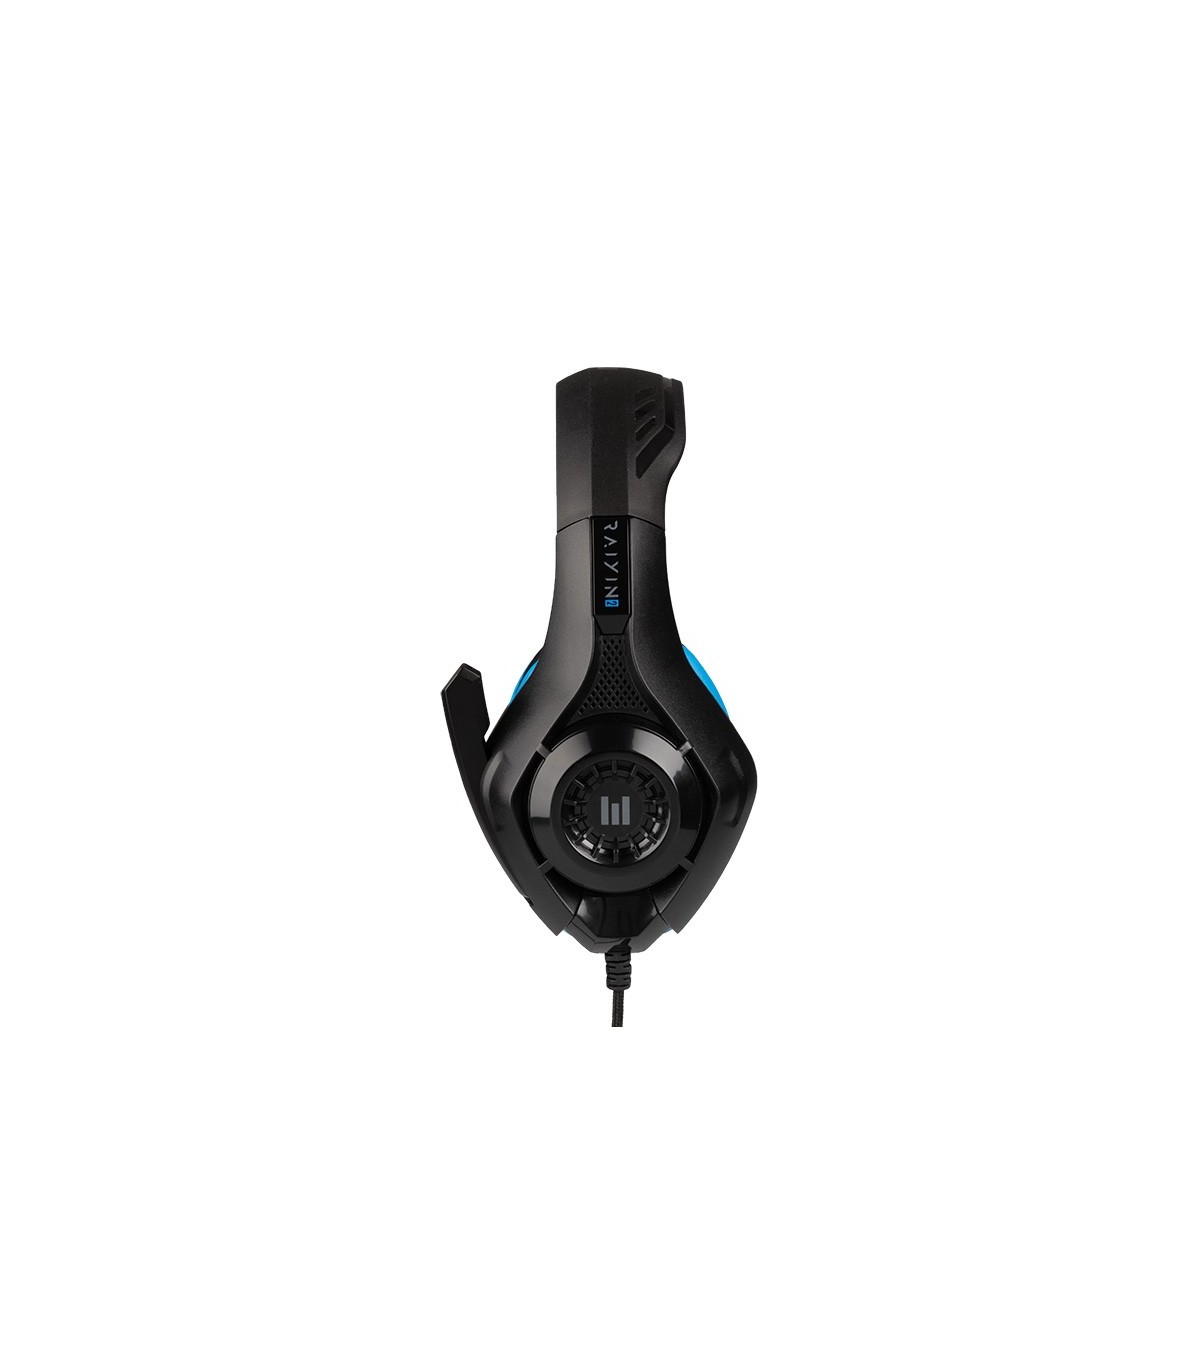 Auricular Gaming  INDECA STEREO GAMING HEADSET STORMBREAKER PS4